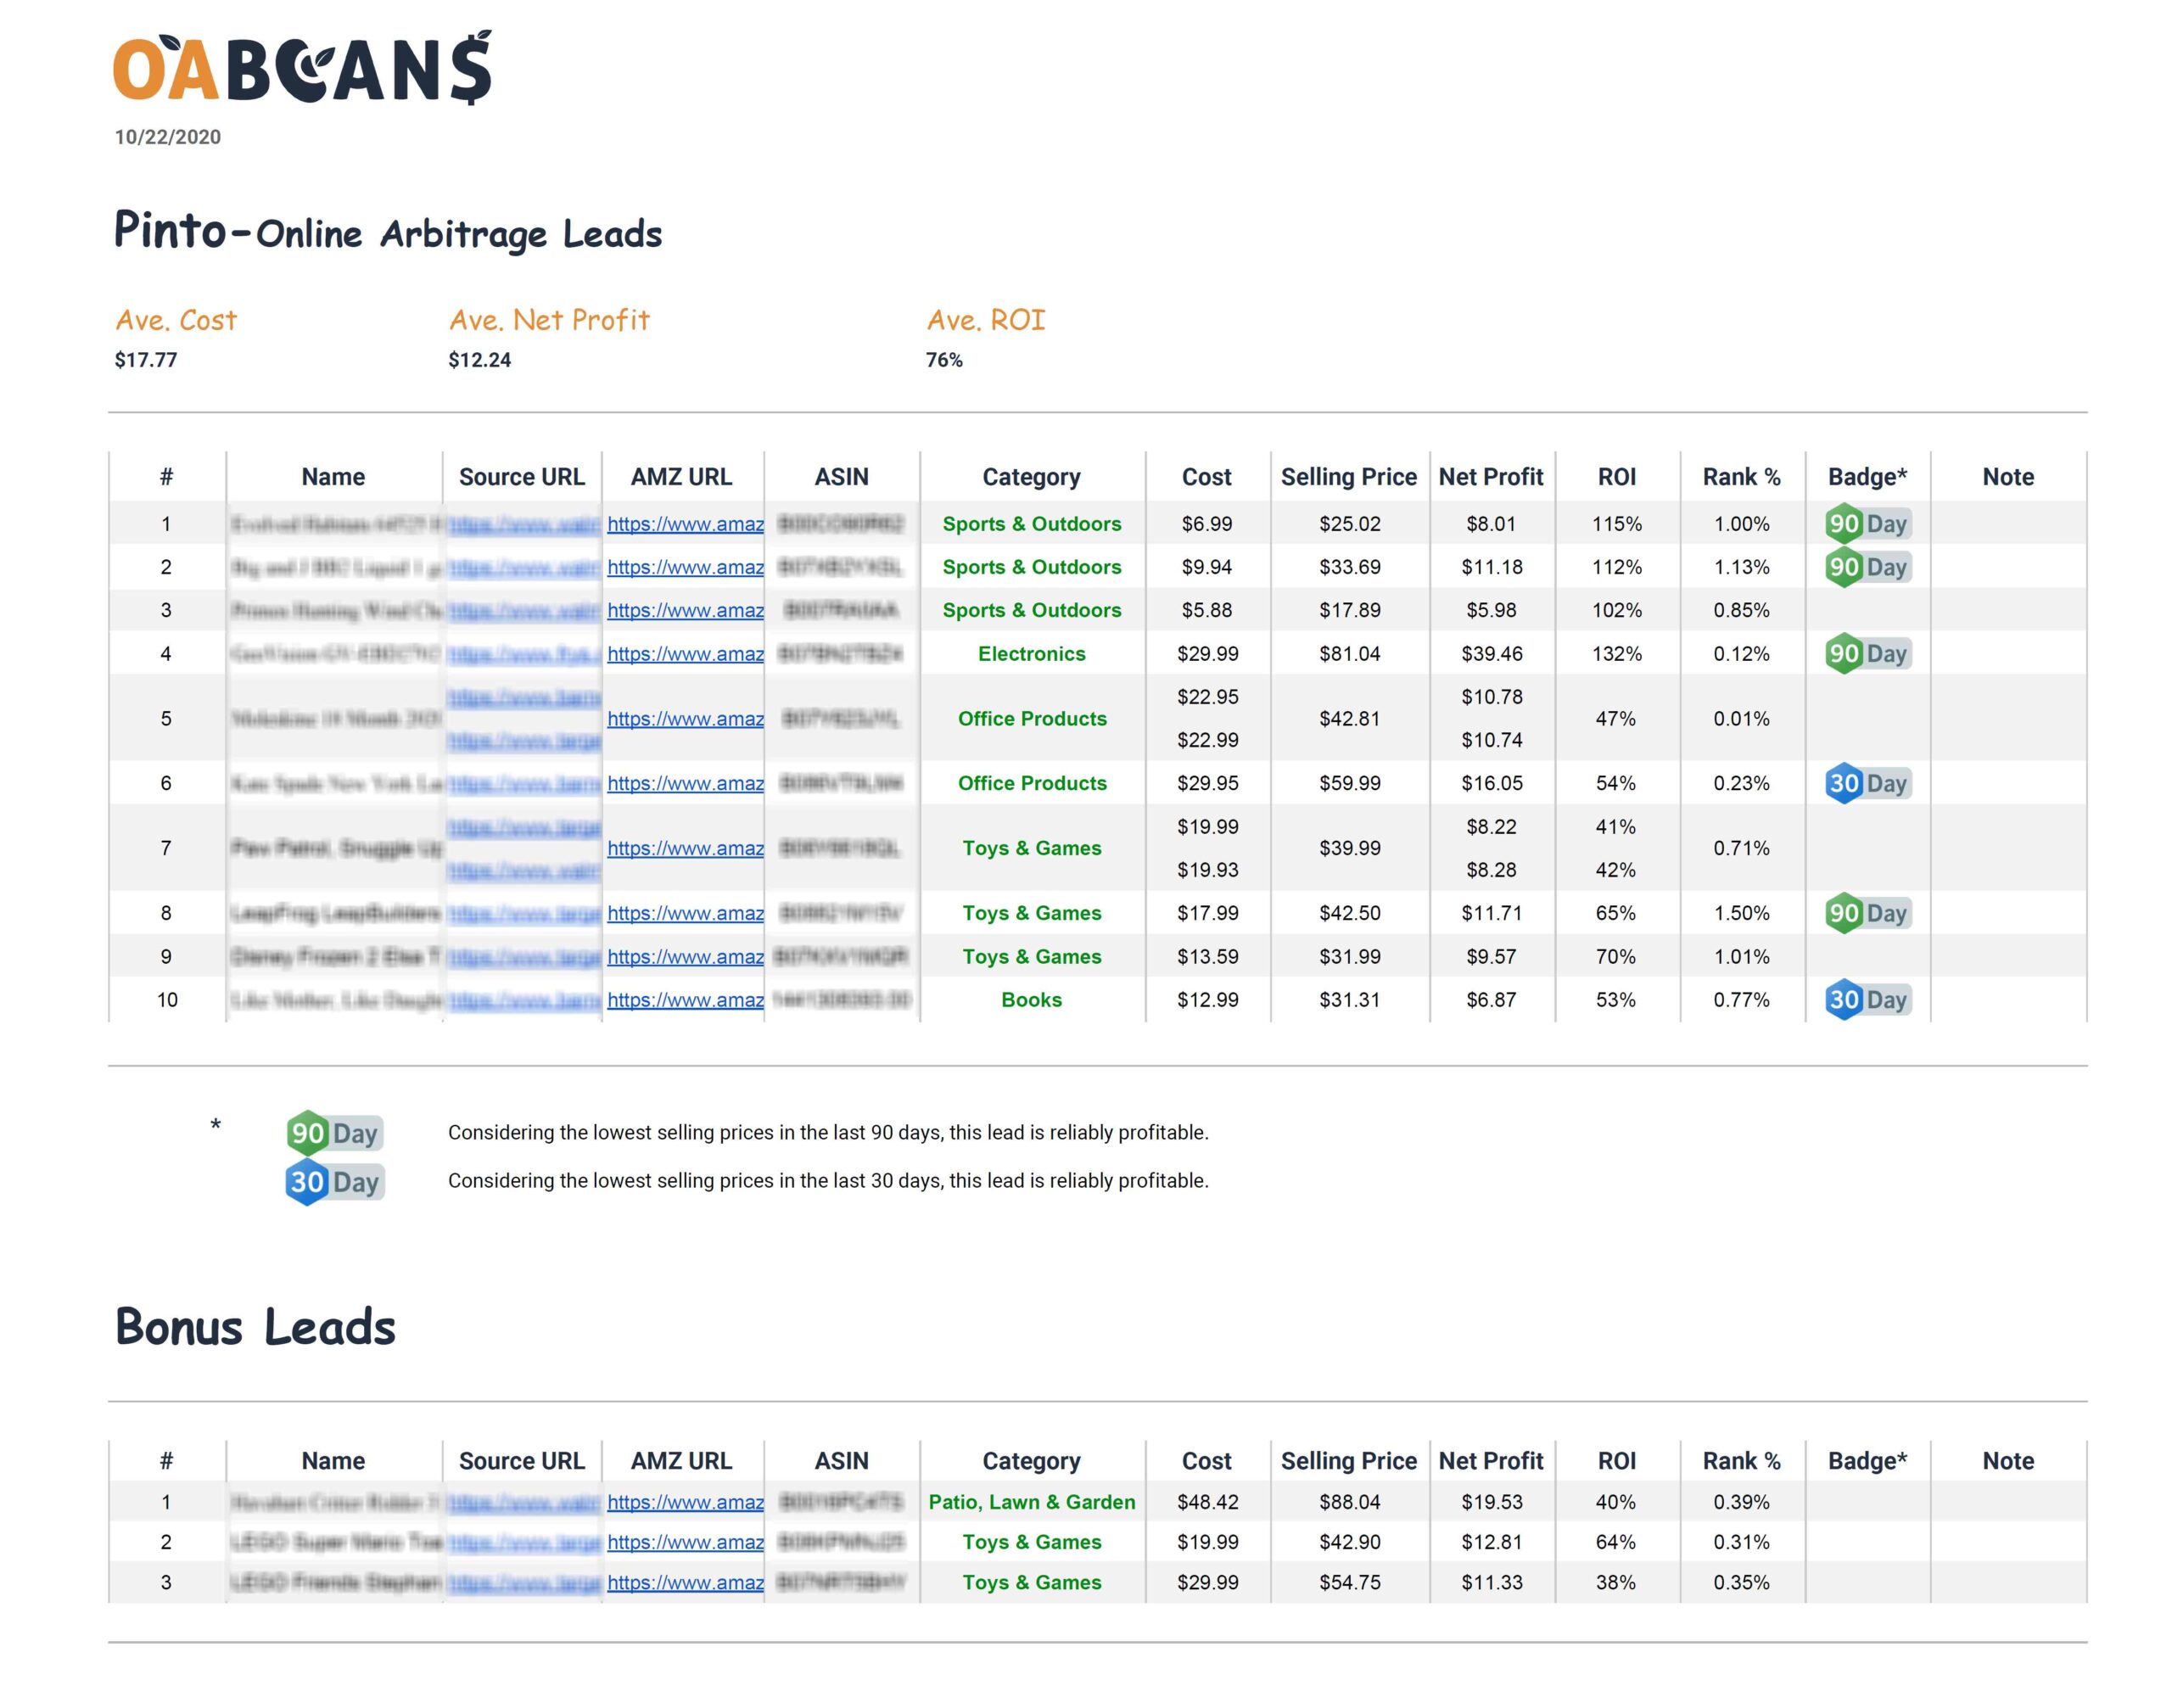 a sample sheet of OABeans amazon online arbitrage sourcing list